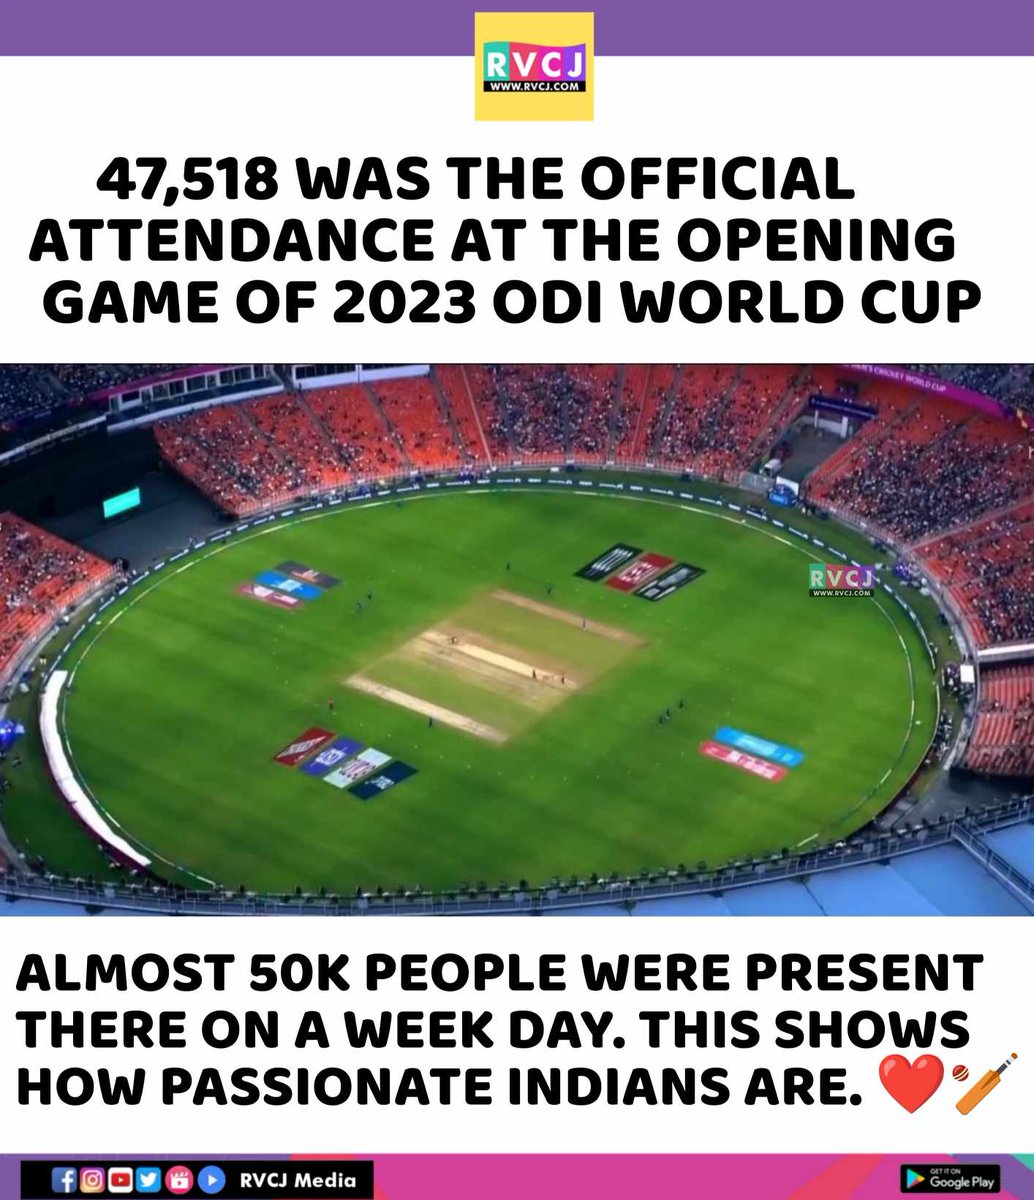 Official Attendance at the Opening Game
#ENGvNZ #ODIWorldCup2023 #ICCWorldCup2023 #ENGvsNZ